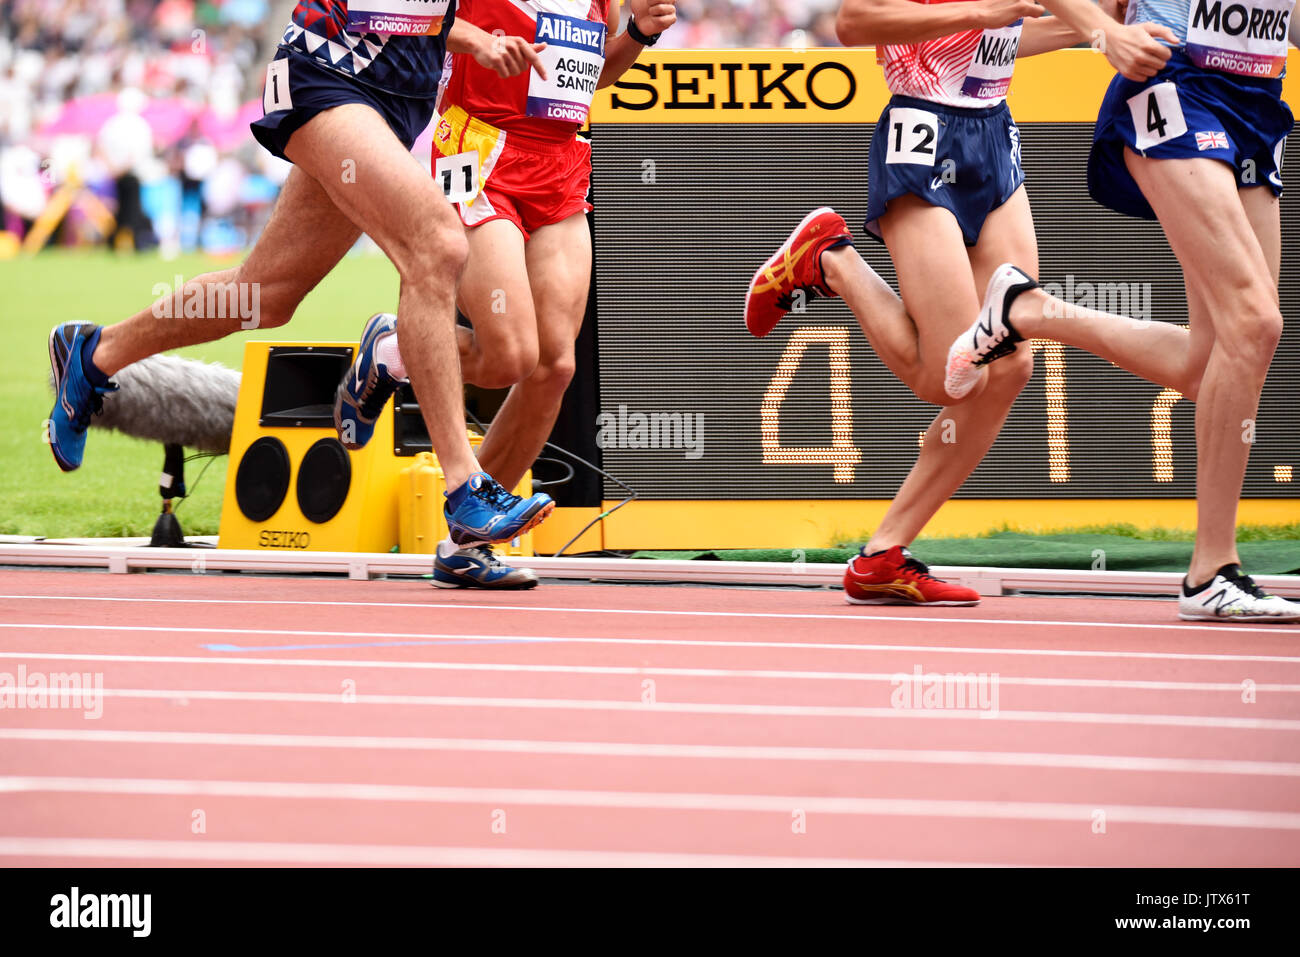 Runner's legs passing the Seiko timing clock. Space for copy Stock Photo -  Alamy